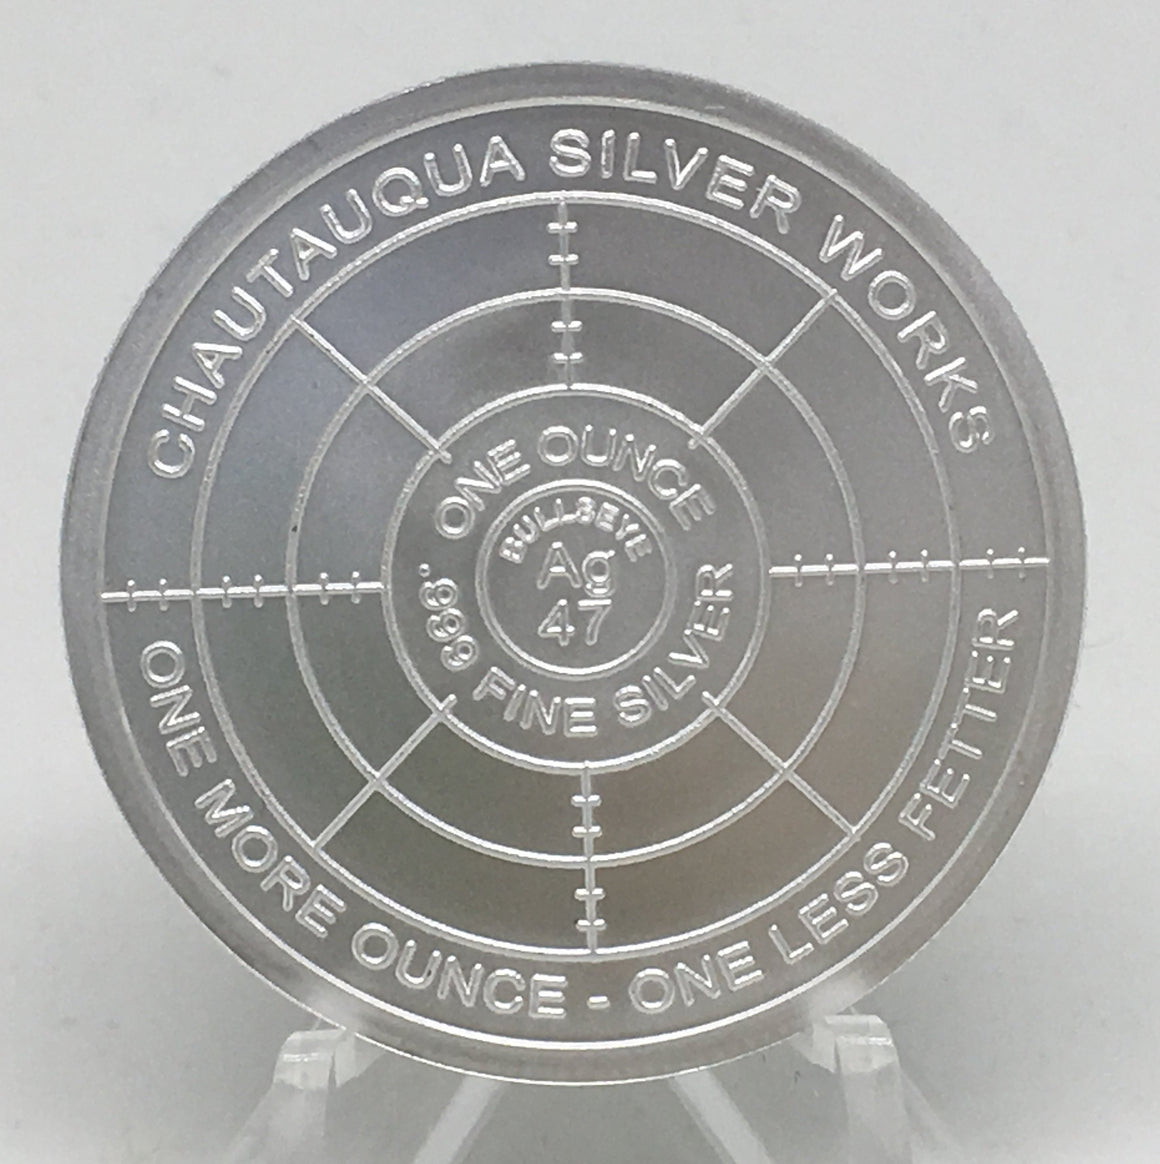 Toxic Series Too #7 Your Chip Has Been Deactivated, BU Finish by Chautauqua Silver Works, 1oz .999 Silver Round.